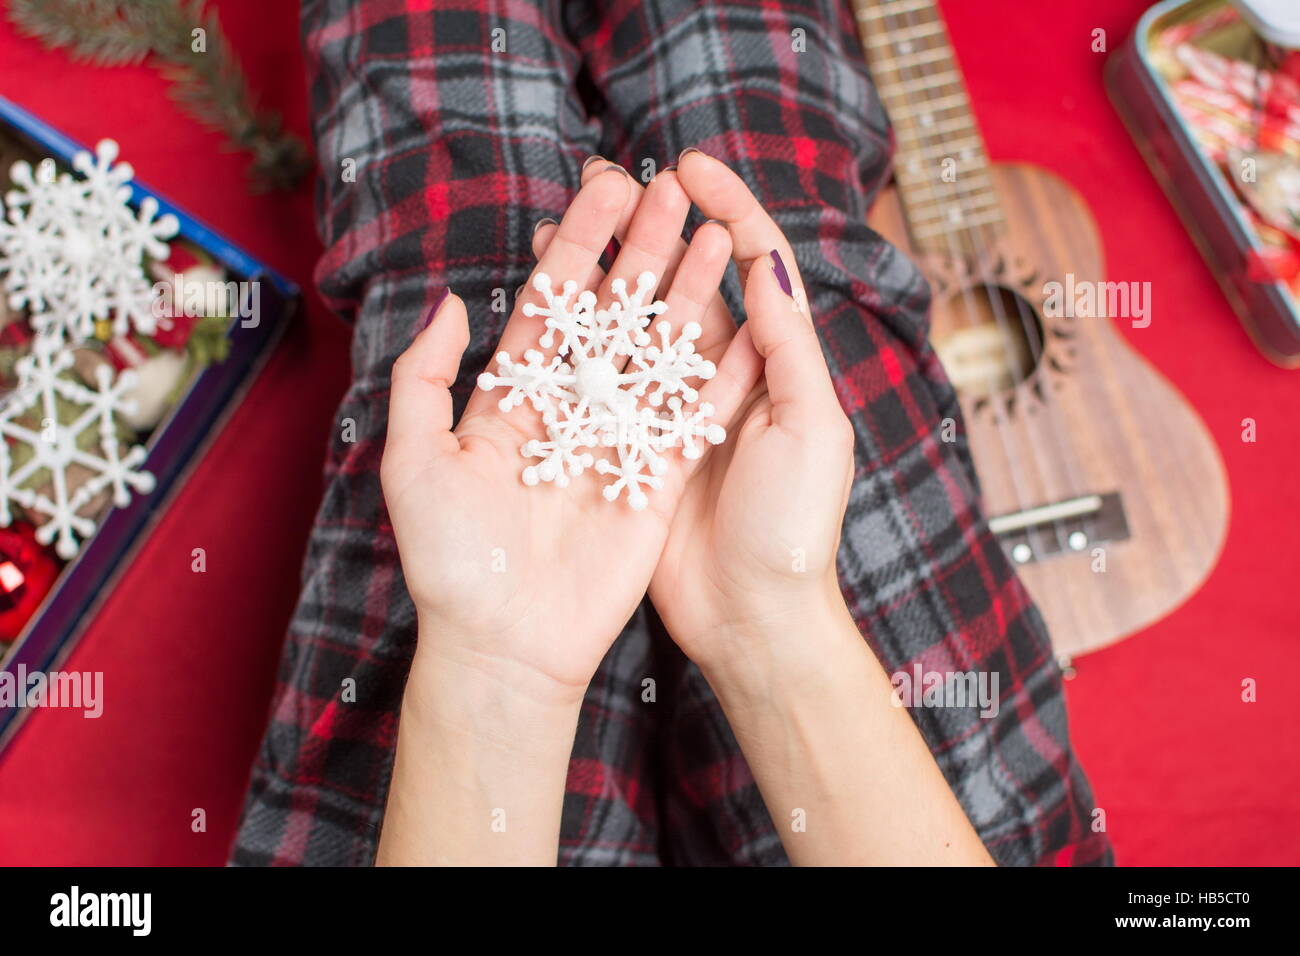 female hands holding an artificial snowflake Stock Photo